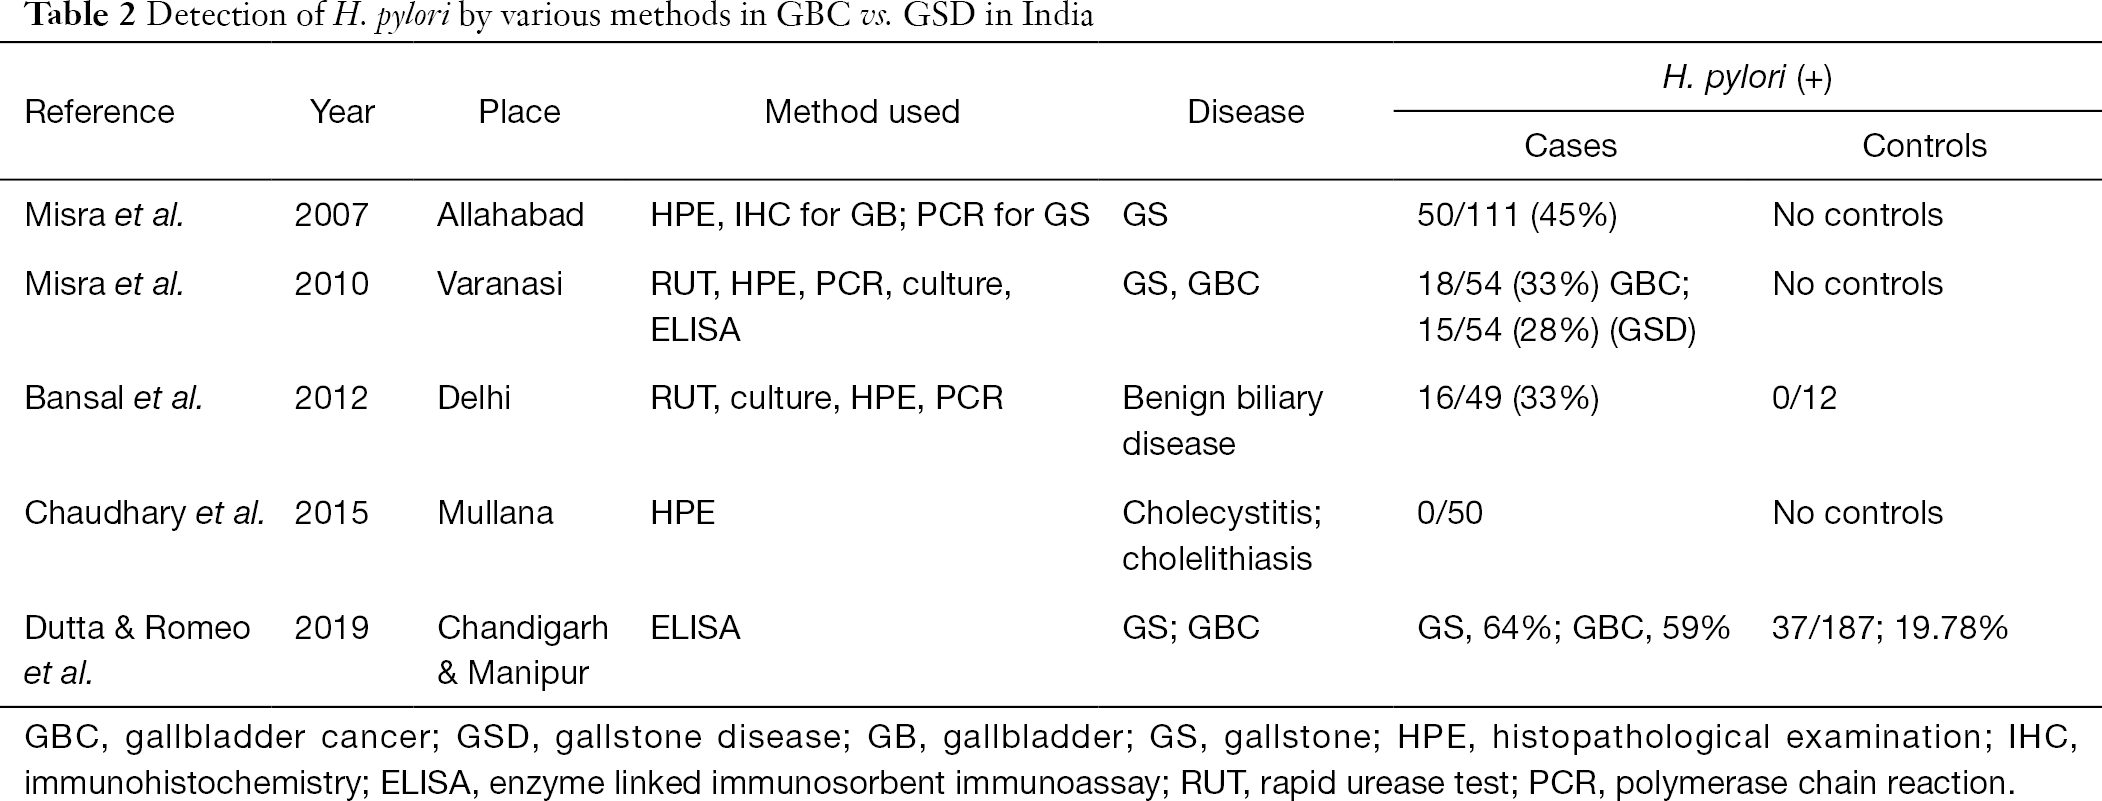 Epidemiology Of Gallbladder Cancer In India Dutta Chinese Clinical Oncology